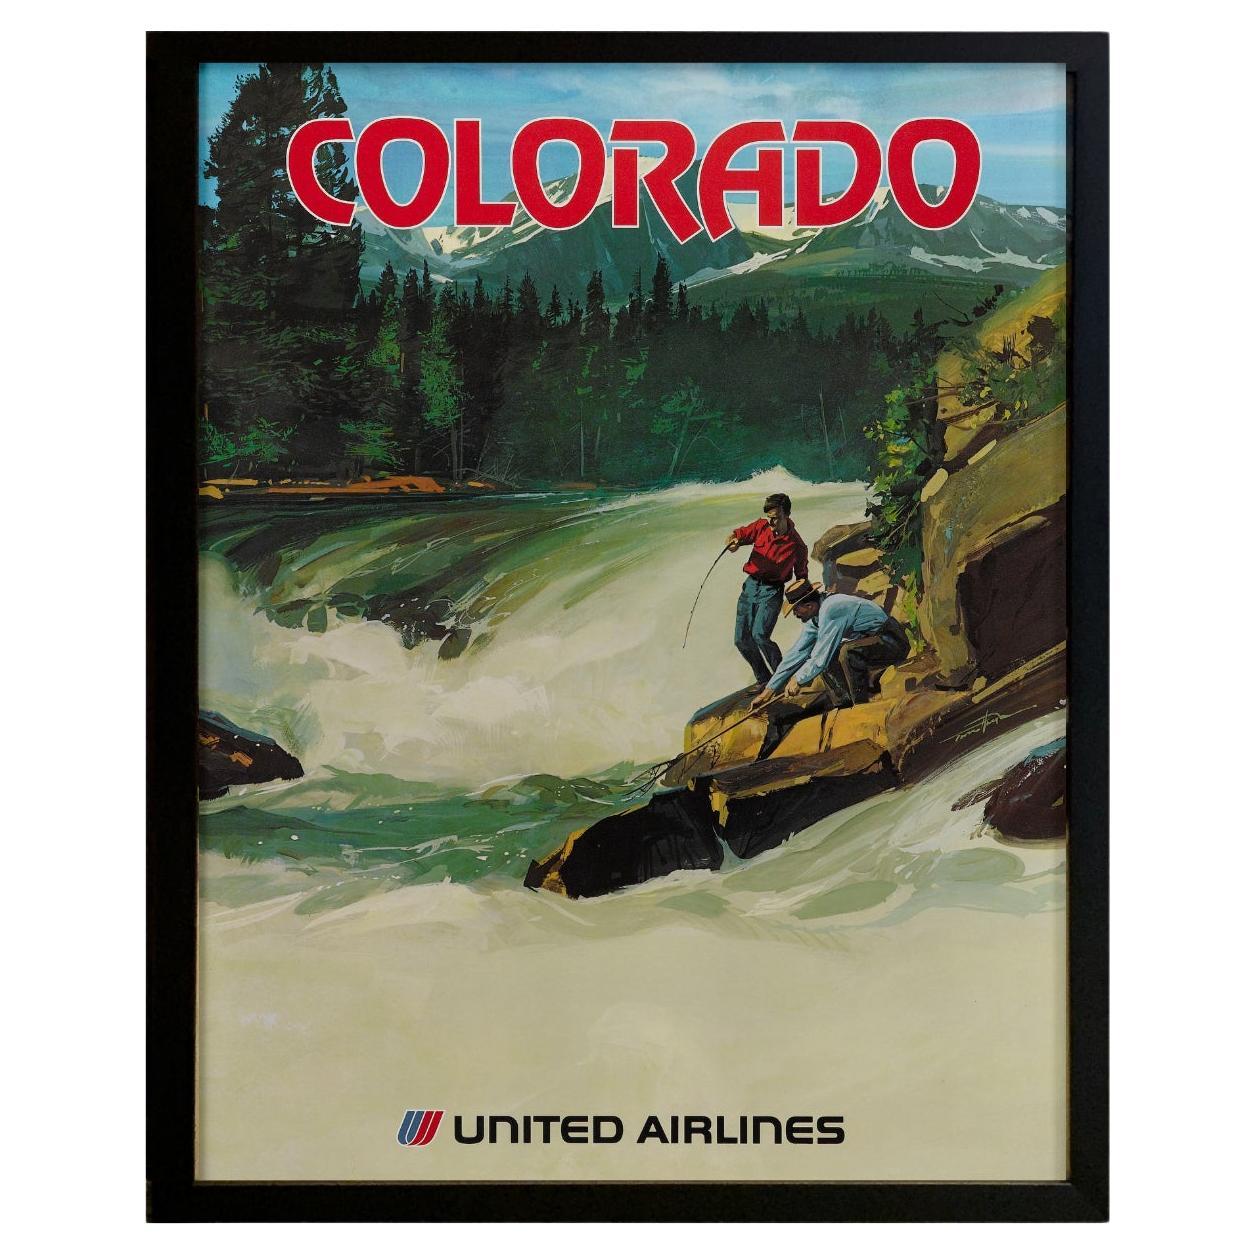 "Colorado" Vintage United Airlines Travel Poster, circa 1970s For Sale